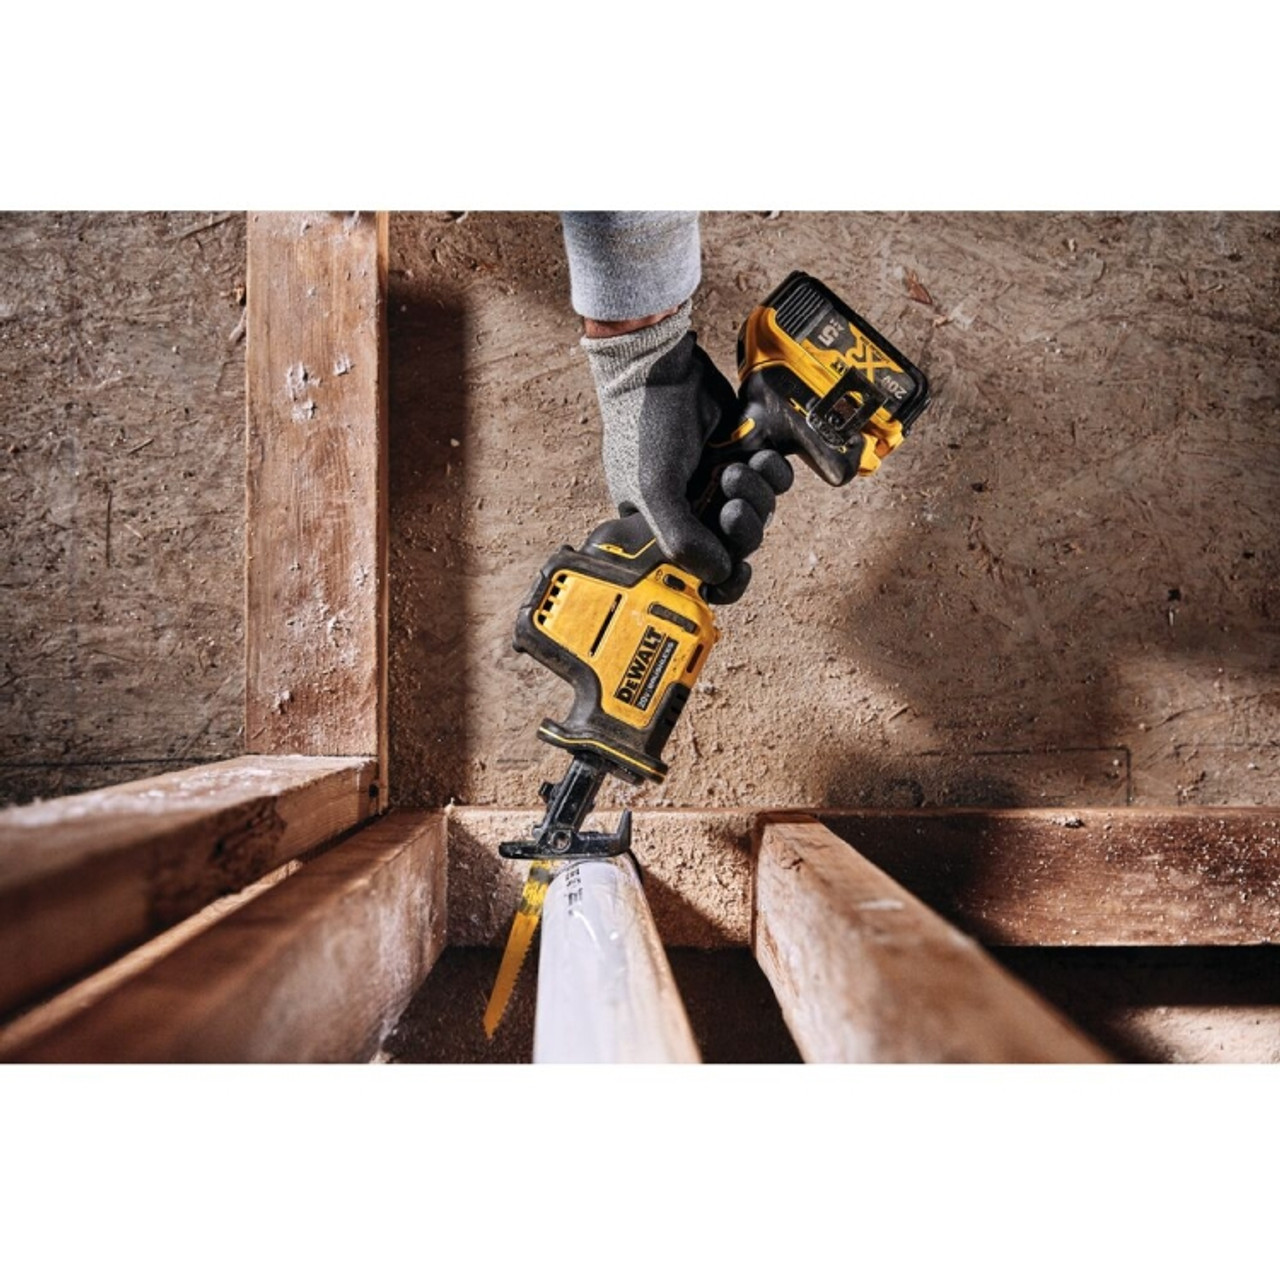 Dewalt DCS369B ATOMIC 20V MAX Cordless One-Handed Reciprocating Saw (Tool  Only)